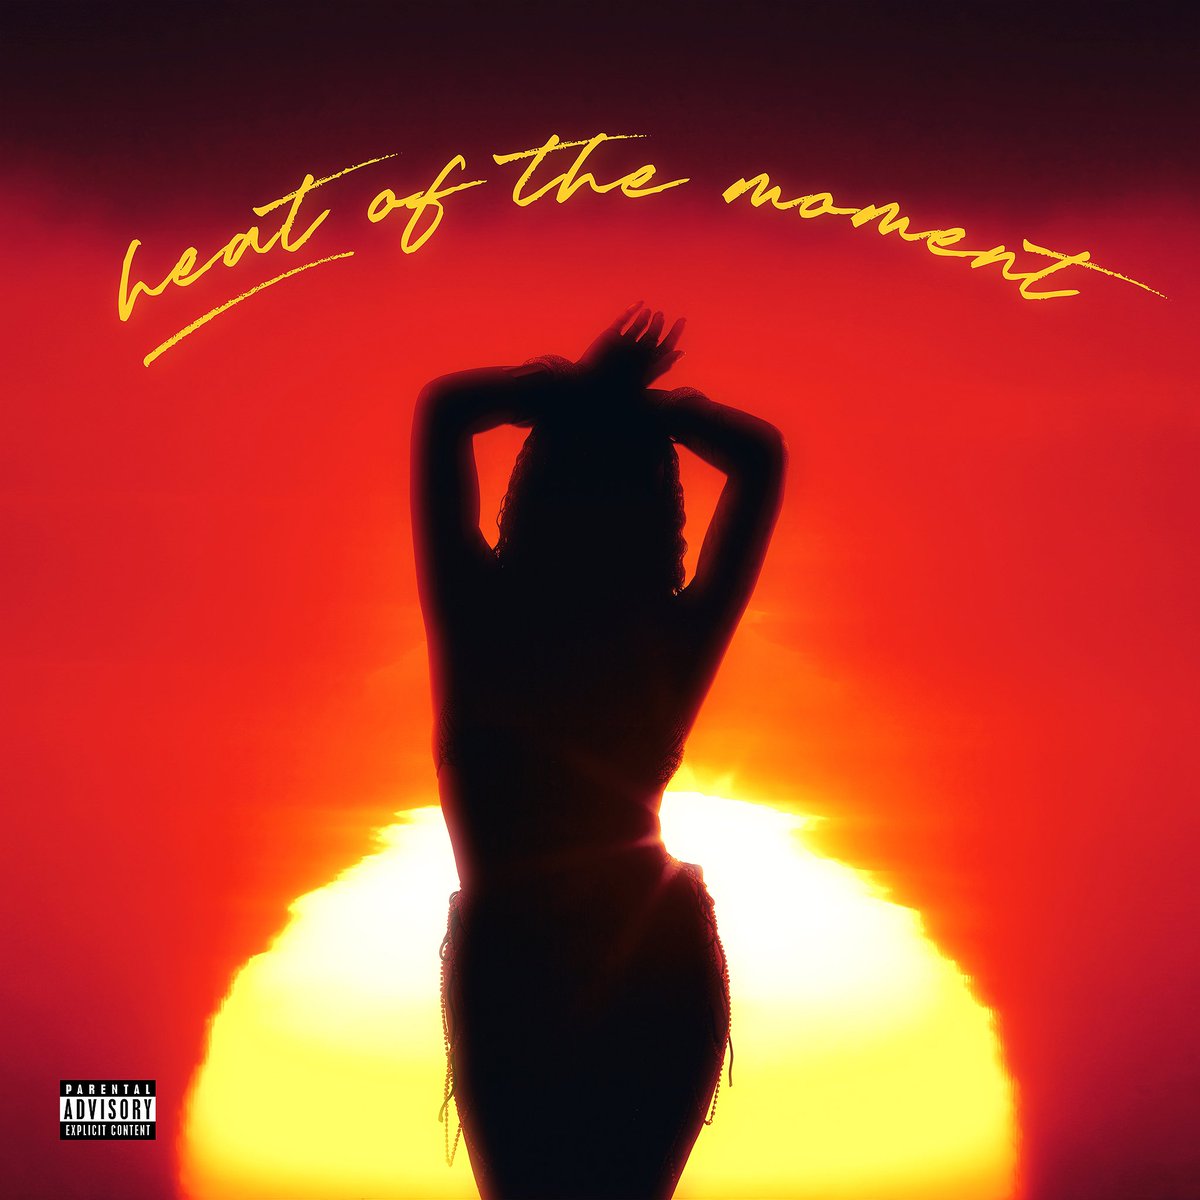 “HEAT OF THE MOMENT” 🧯🧯🧯
New album FRIDAY 7/30 
Pre-Save it now music.empi.re/heatofthemoment 
#ItsTime ❤️‍🔥❤️‍🔥❤️‍🔥